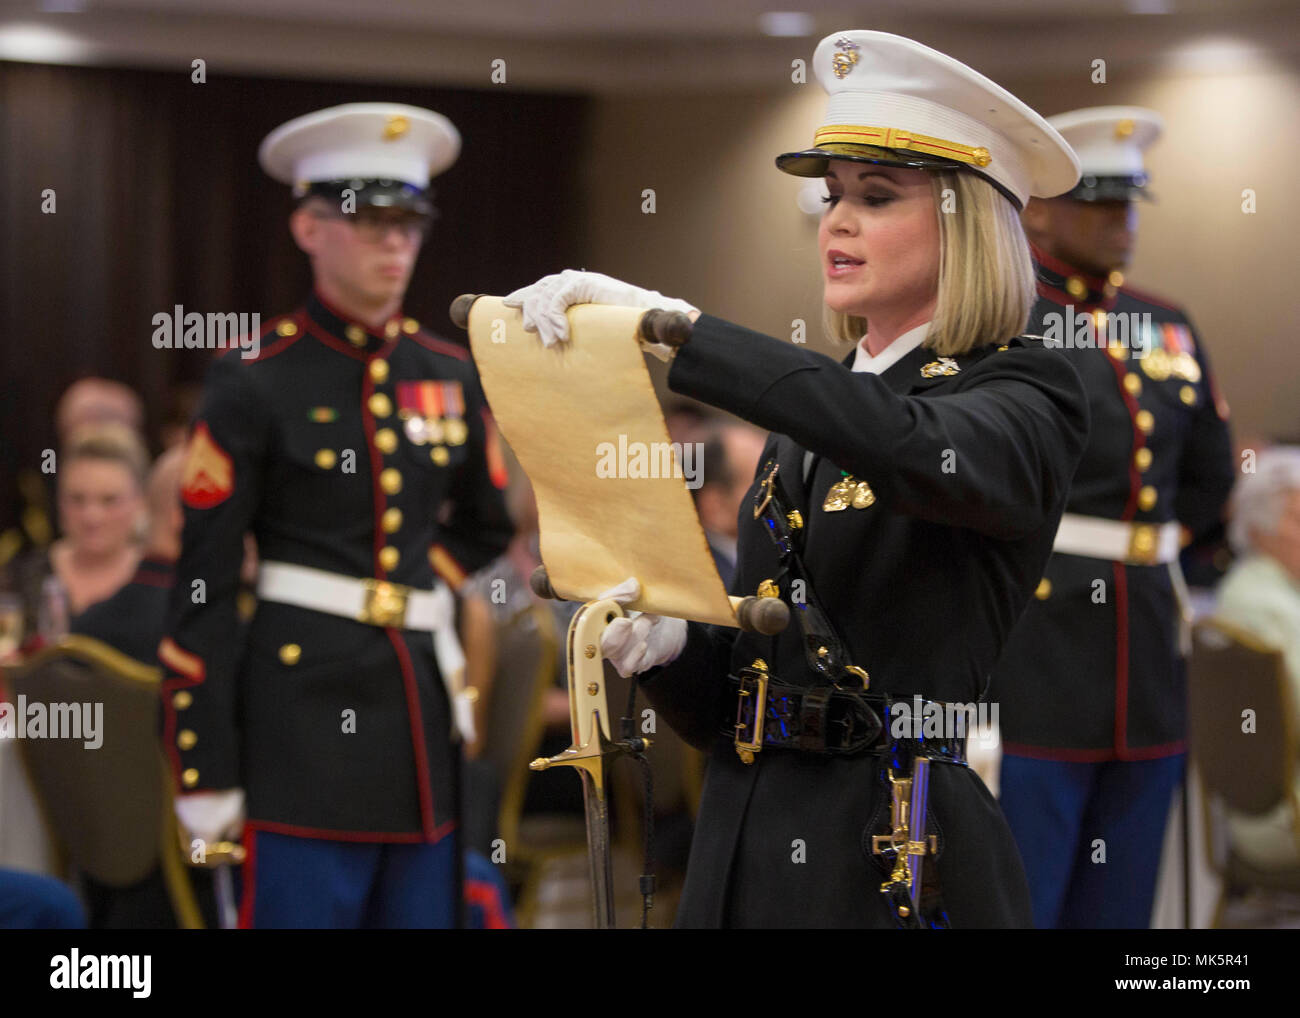 Captain Christina M. Shulman reads the birthday message from the 13th Commandant of the Marine Corps, Maj. Gen. John A. Lejeune, during 6th Marine Corps District’s (6MCD) 242nd Marine Corps Ball at the Omni Hotel Hilton Head, South Carolina, Nov 3, 2017. The Marines, Sailors and their families celebrated the Marine Corps Birthday Ball to increase morale and foster camaraderie throughout the District. The District Headquarters supports the efforts of recruiting within the Southeastern United States. Shulman is the adjutant for 6MCD. (U.S. Marine Corps photo by Lance Cpl. Jack A. E. Rigsby) Stock Photo